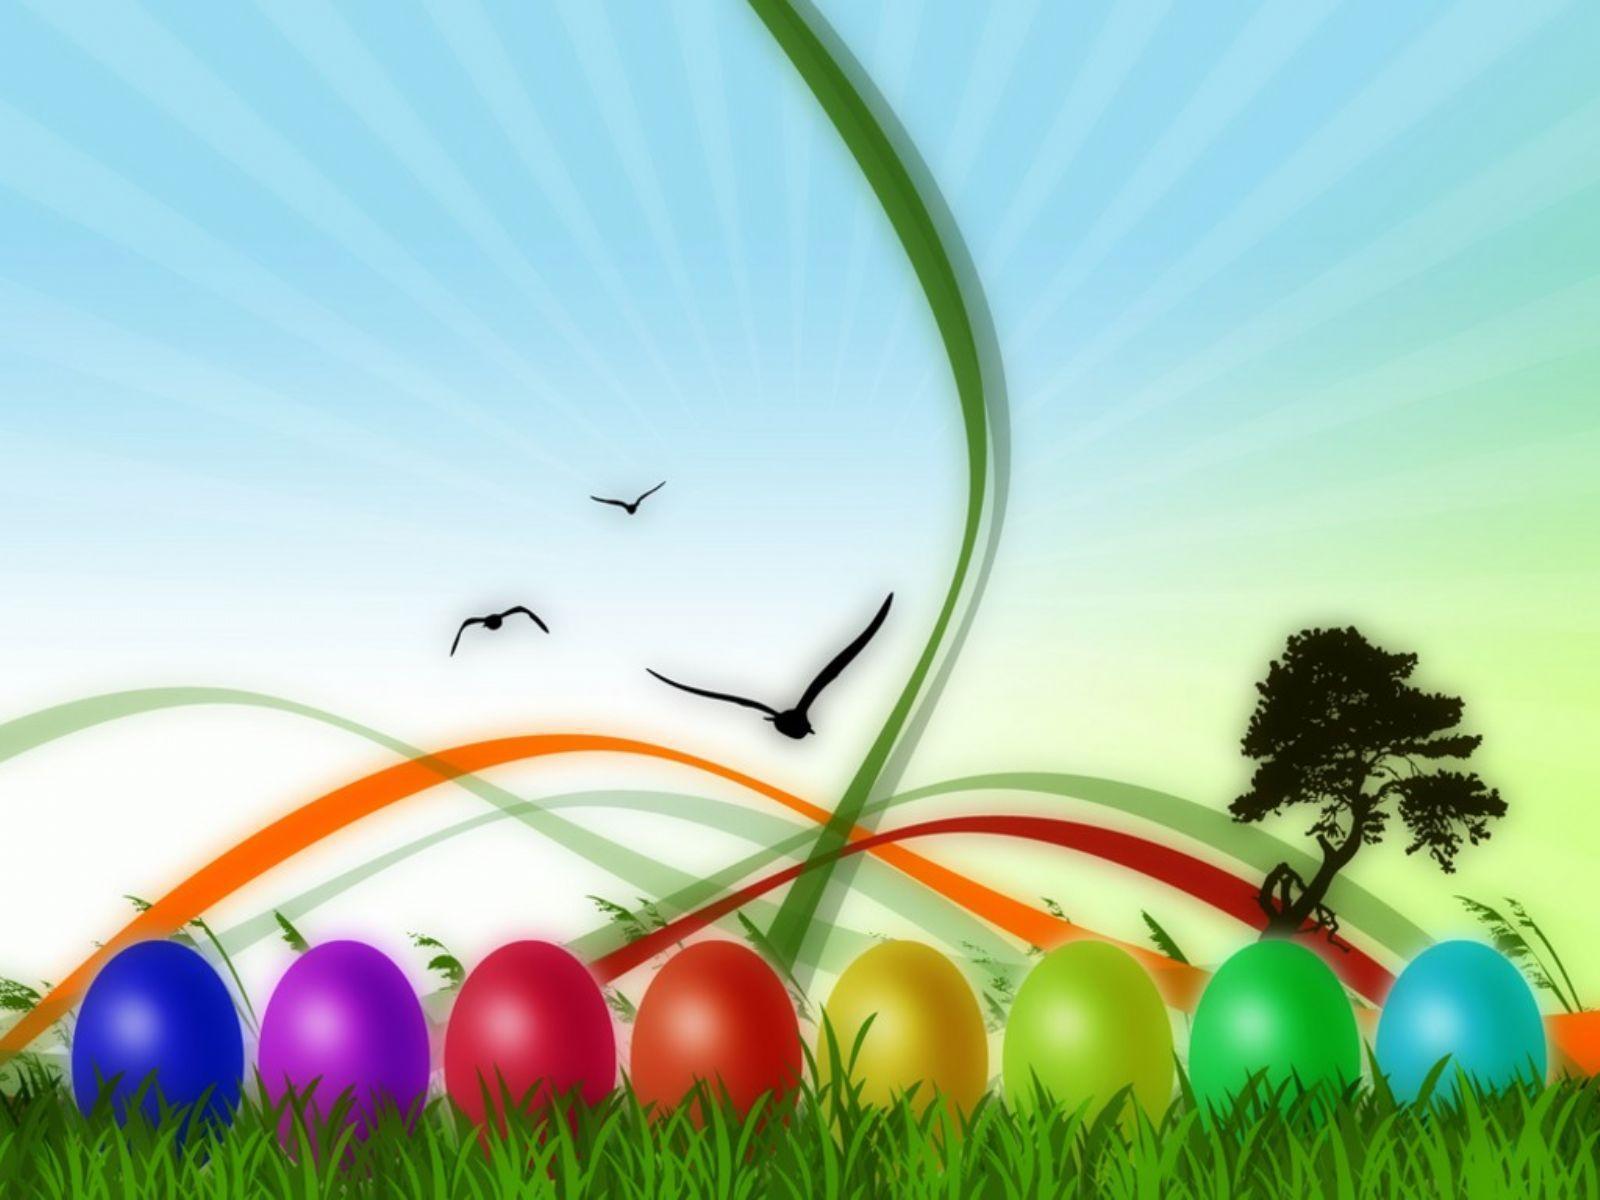 Unique And Awesome Easter wallpaper For You